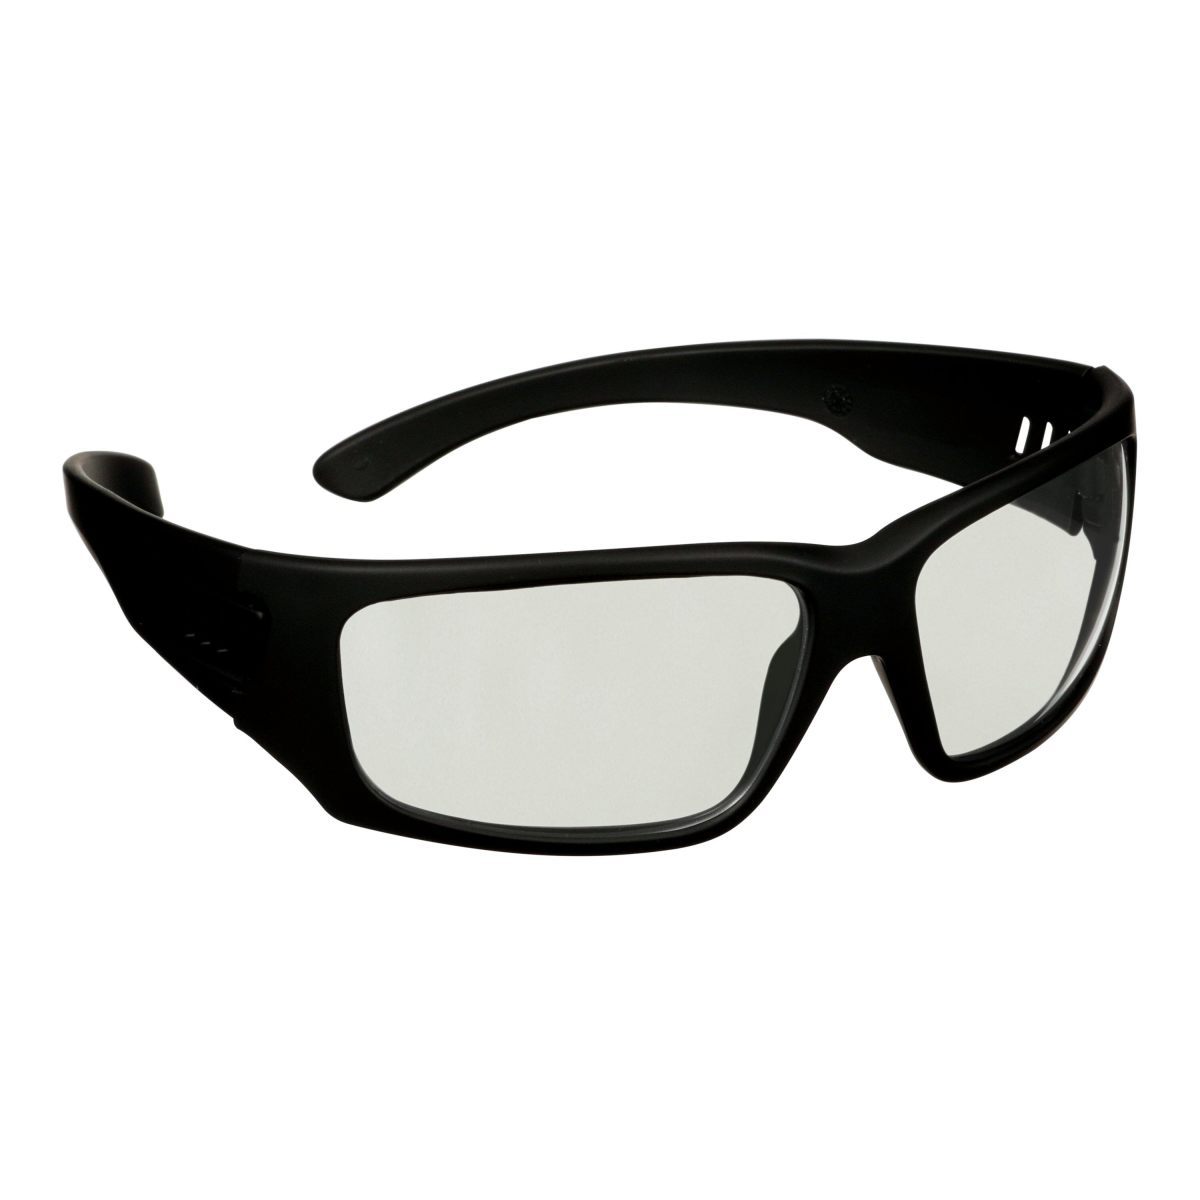 3M™ Maxim™ Elite 1000 Black Safety Glasses With Gray Scotchgard™ Indoor/Outdoor/Anti-Fog/Anti-Scratch Lens (Availability restric